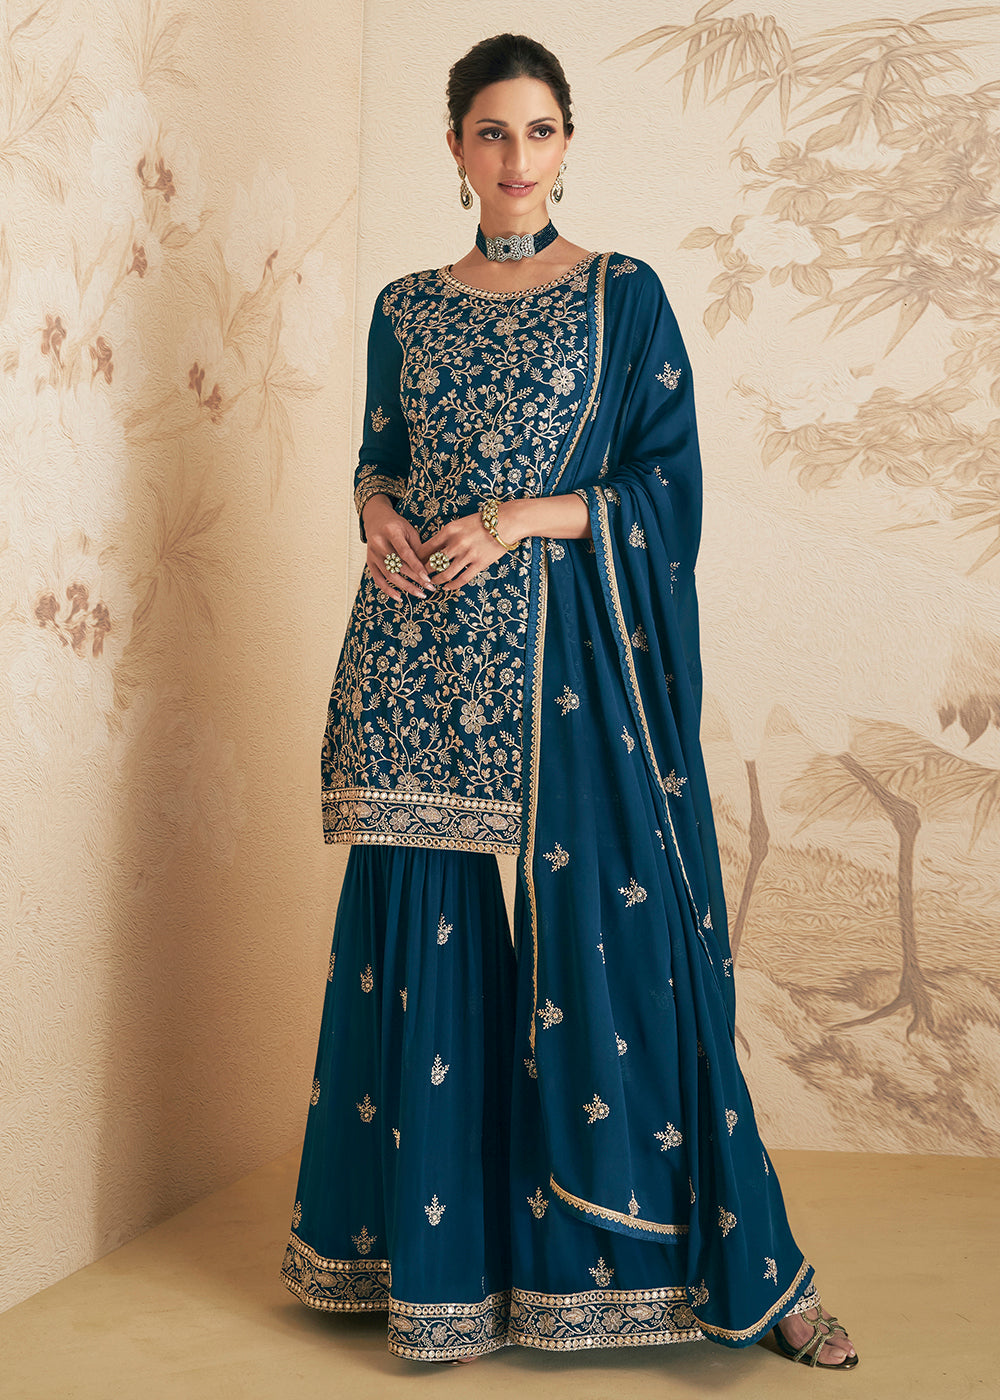 Shop Now Teal Blue Thread & Sequins Embroidered Designer Sharara Suit Online at Empress Clothing in USA, UK, Canada, Germany & Worldwide. 